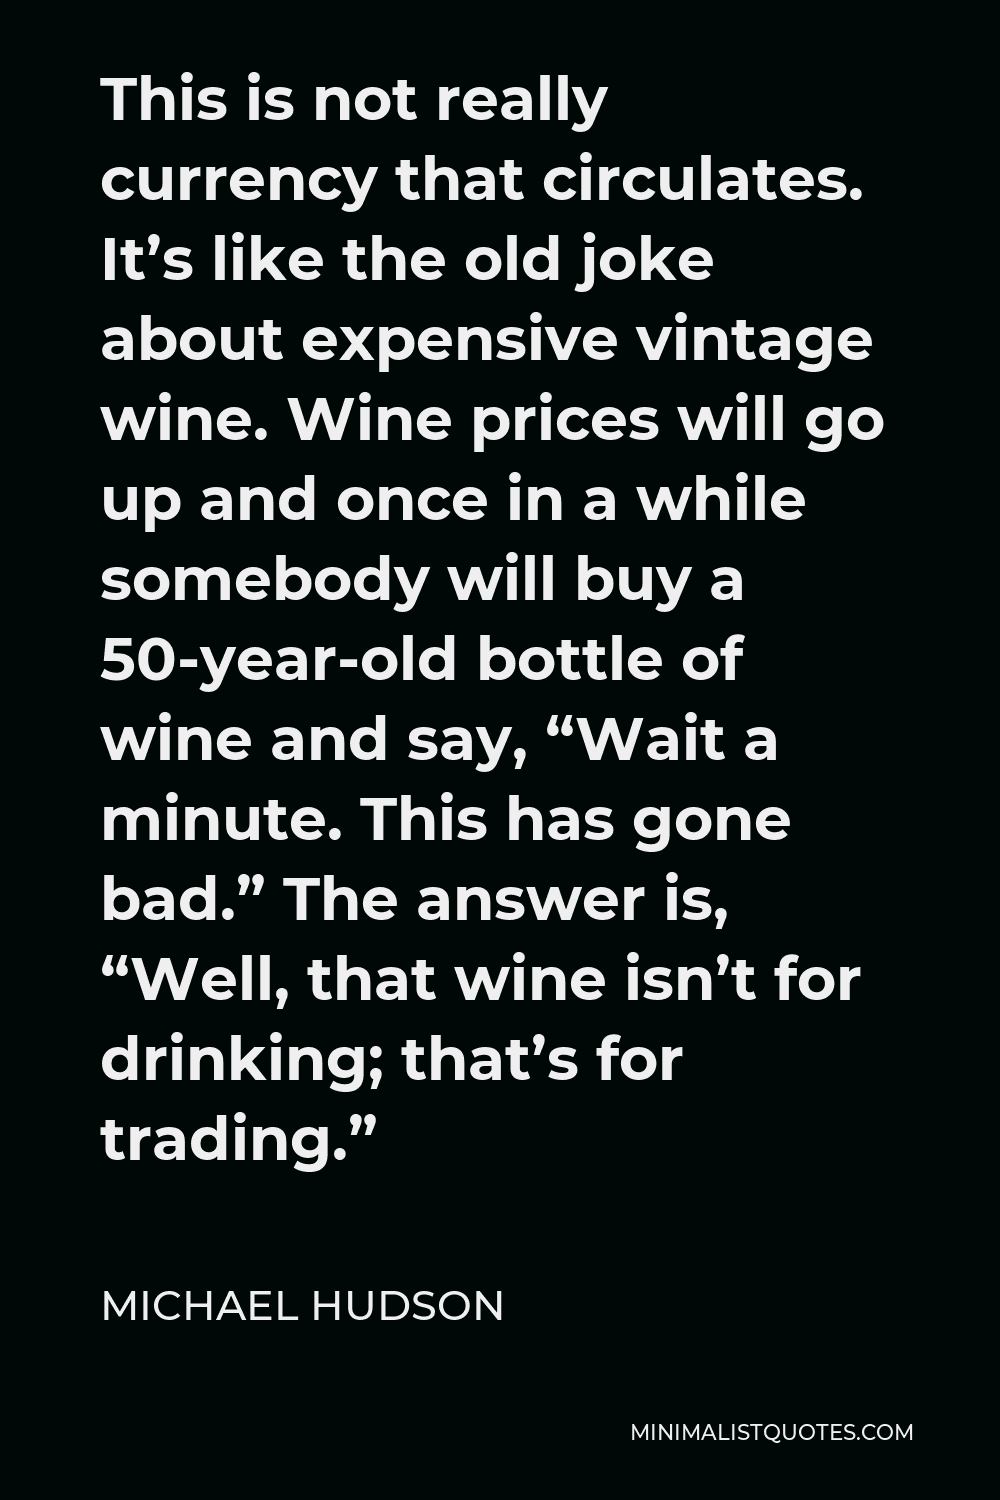 Michael Hudson Quote - This is not really currency that circulates. It’s like the old joke about expensive vintage wine. Wine prices will go up and once in a while somebody will buy a 50-year-old bottle of wine and say, “Wait a minute. This has gone bad.” The answer is, “Well, that wine isn’t for drinking; that’s for trading.”